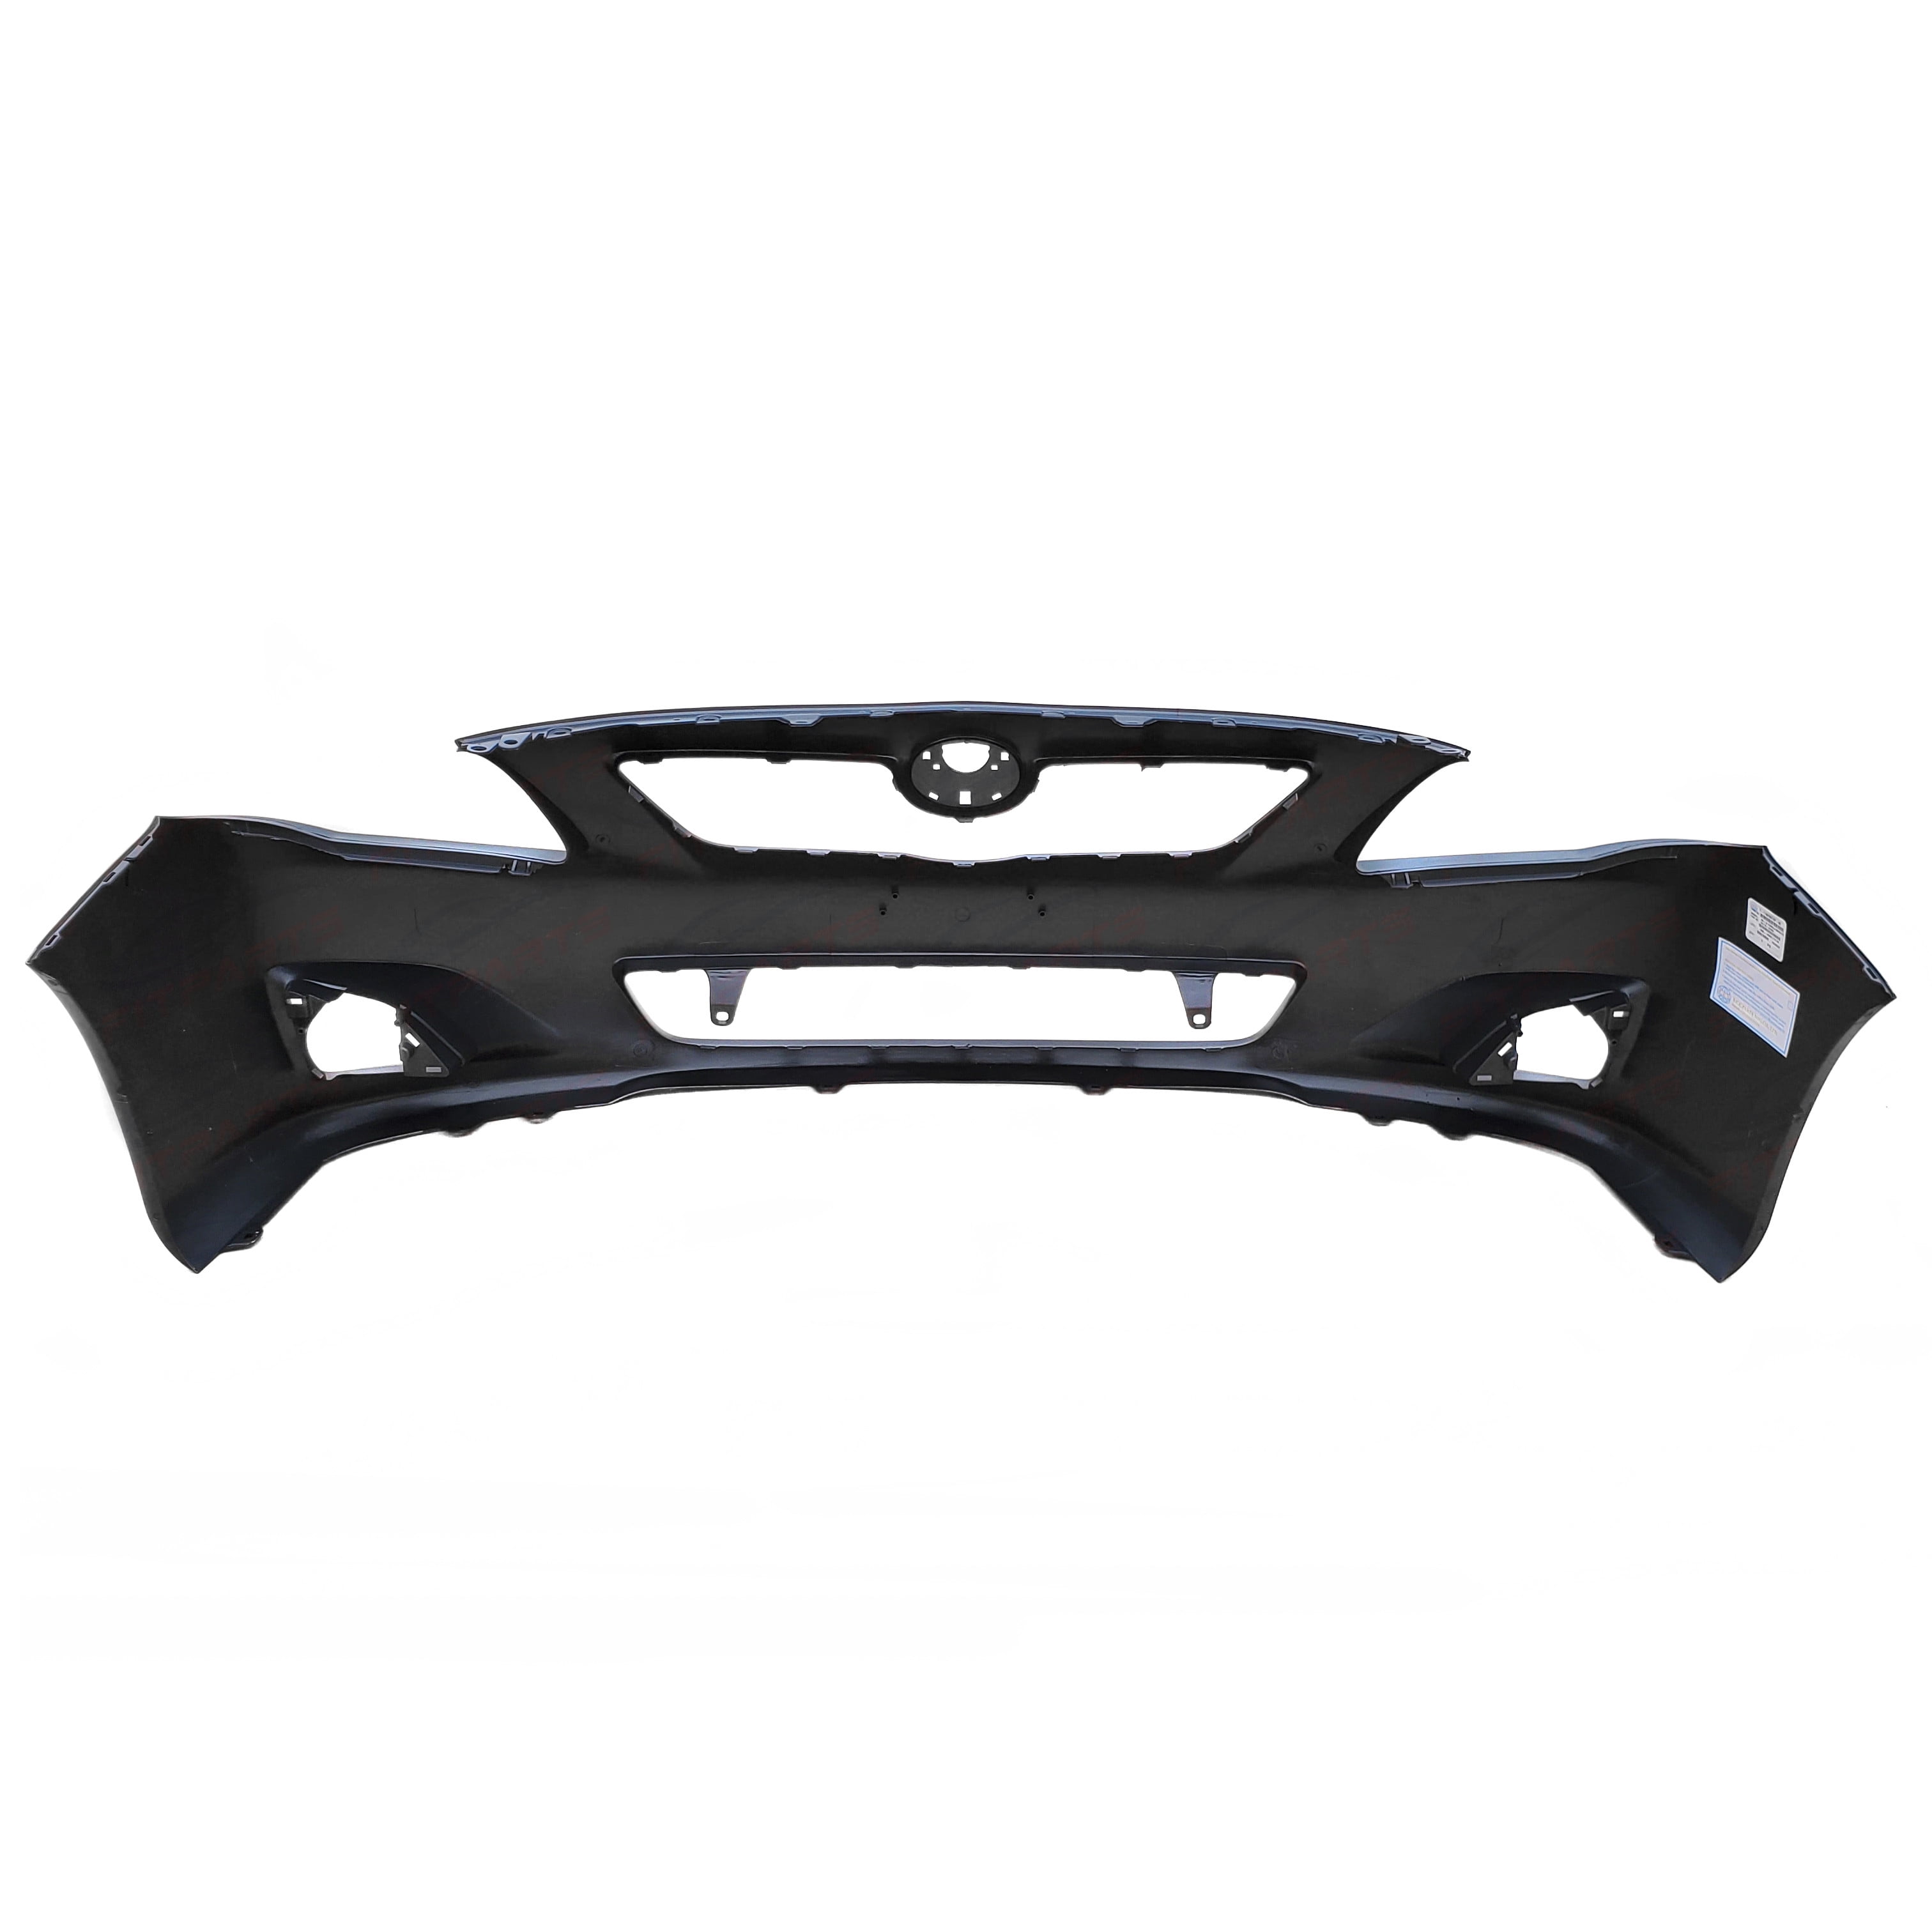 New Front Bumper Cover Primed Fits 2009-2010 Toyota Corolla TO1000343 5211902990 